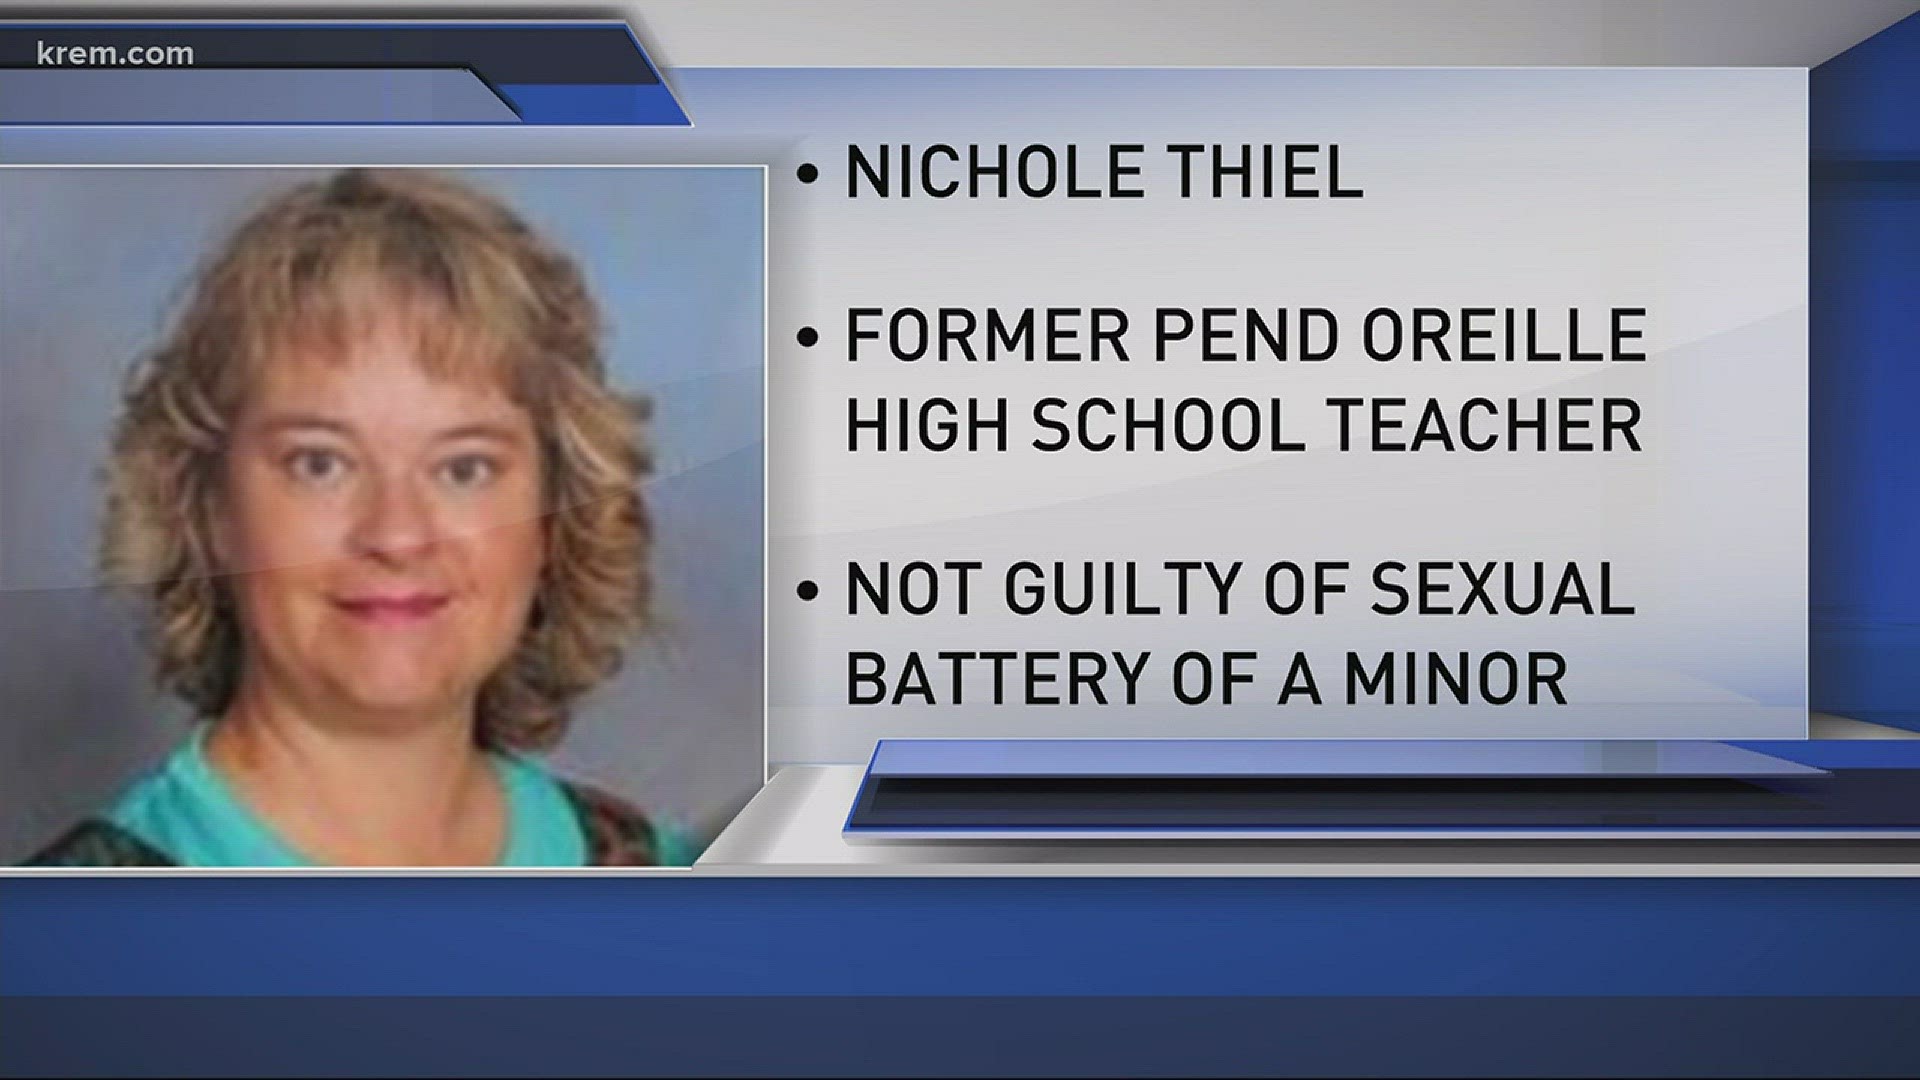 Nicole Thiel, 48, was found not guilty of sexual battery of a minor on Thursday.